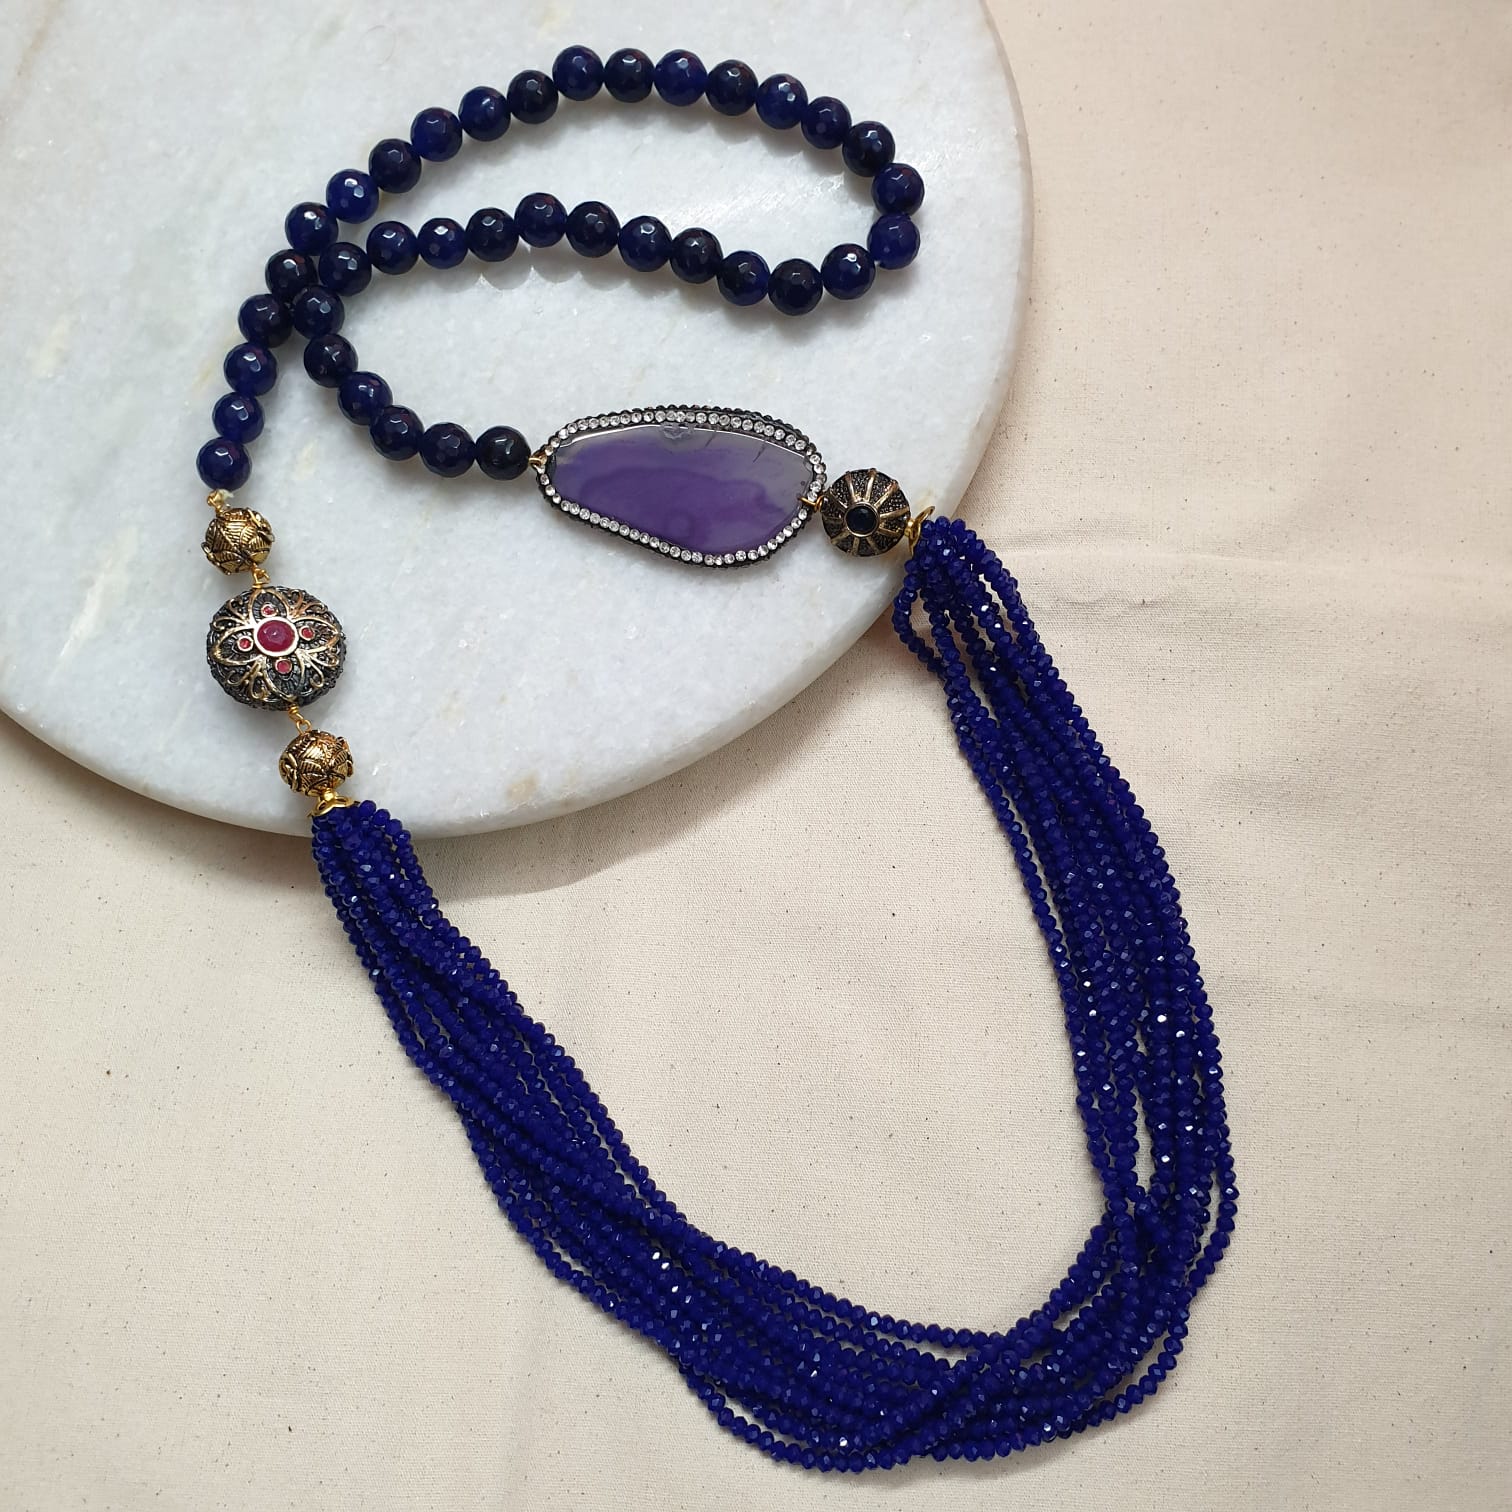 Antique and Blue Beaded Necklace Set